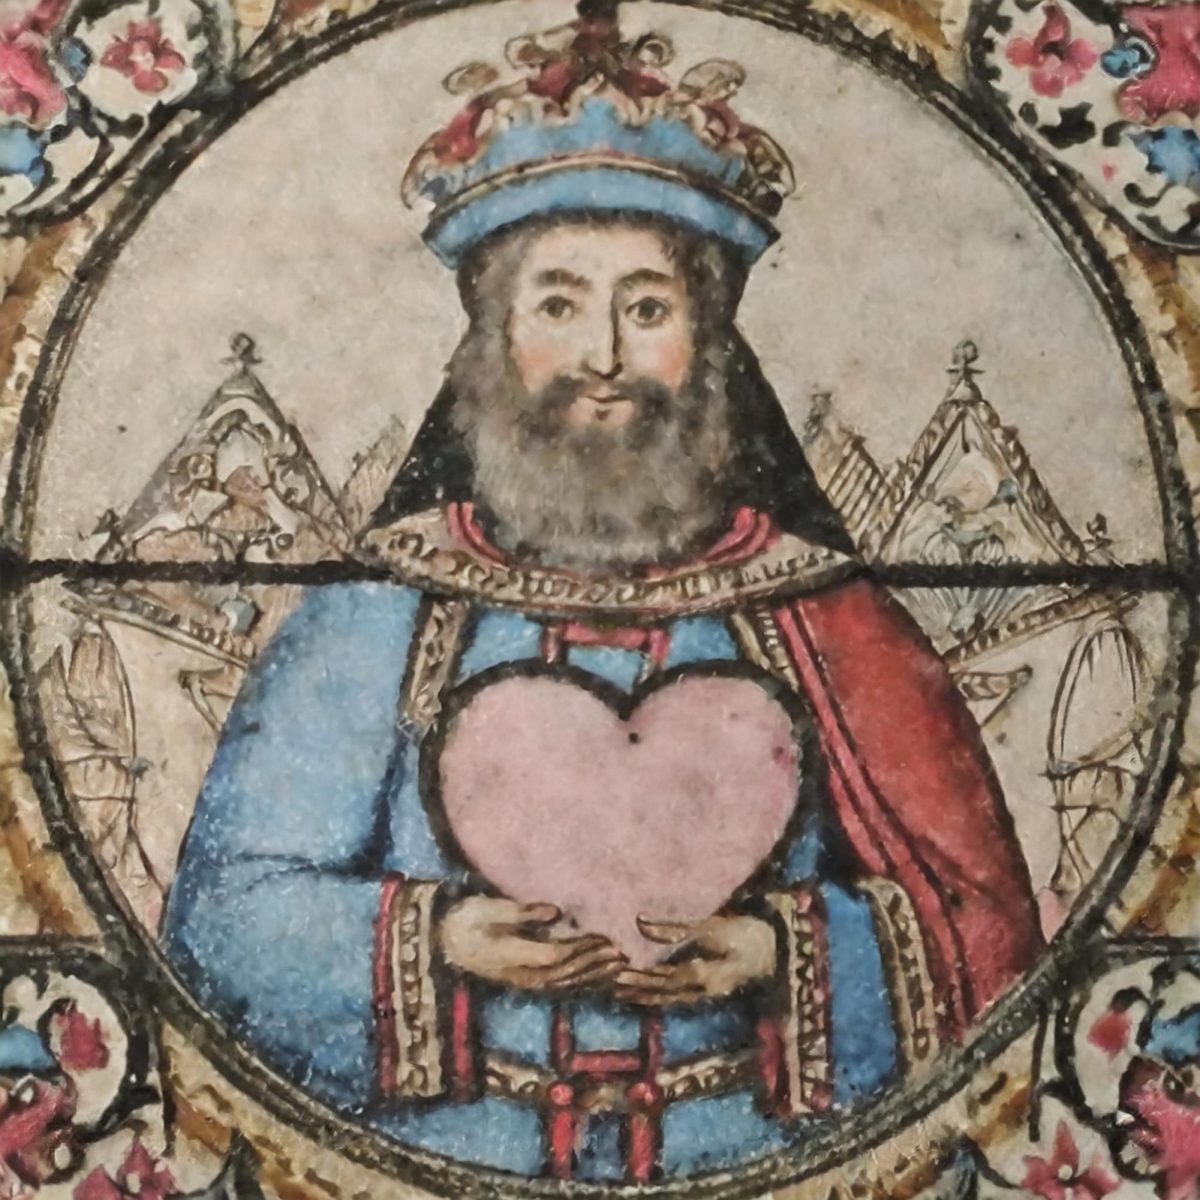 Firefly stained glass window of old medieval king holding a large pink heart, with the heart being a (1)